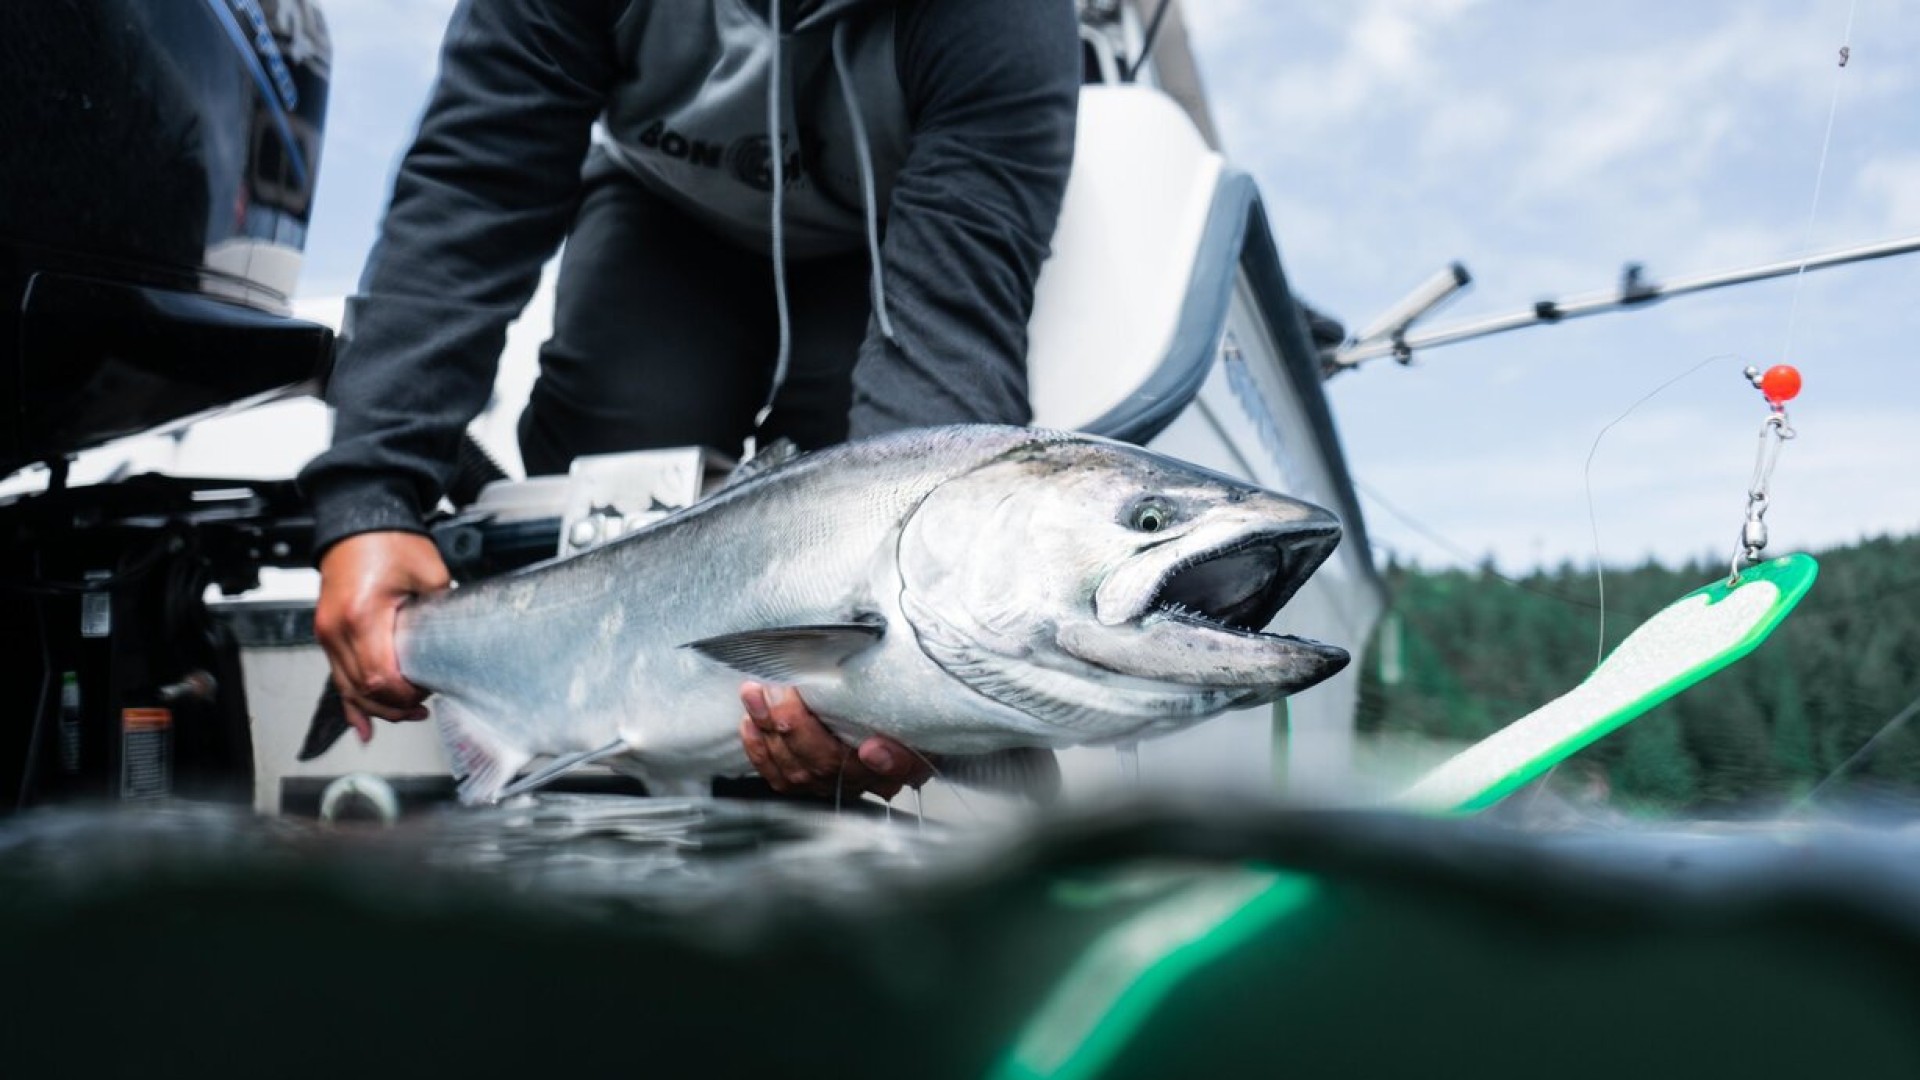 Boat Show Sale - New And Used Gear! - Bon Chovy Salmon Fishing